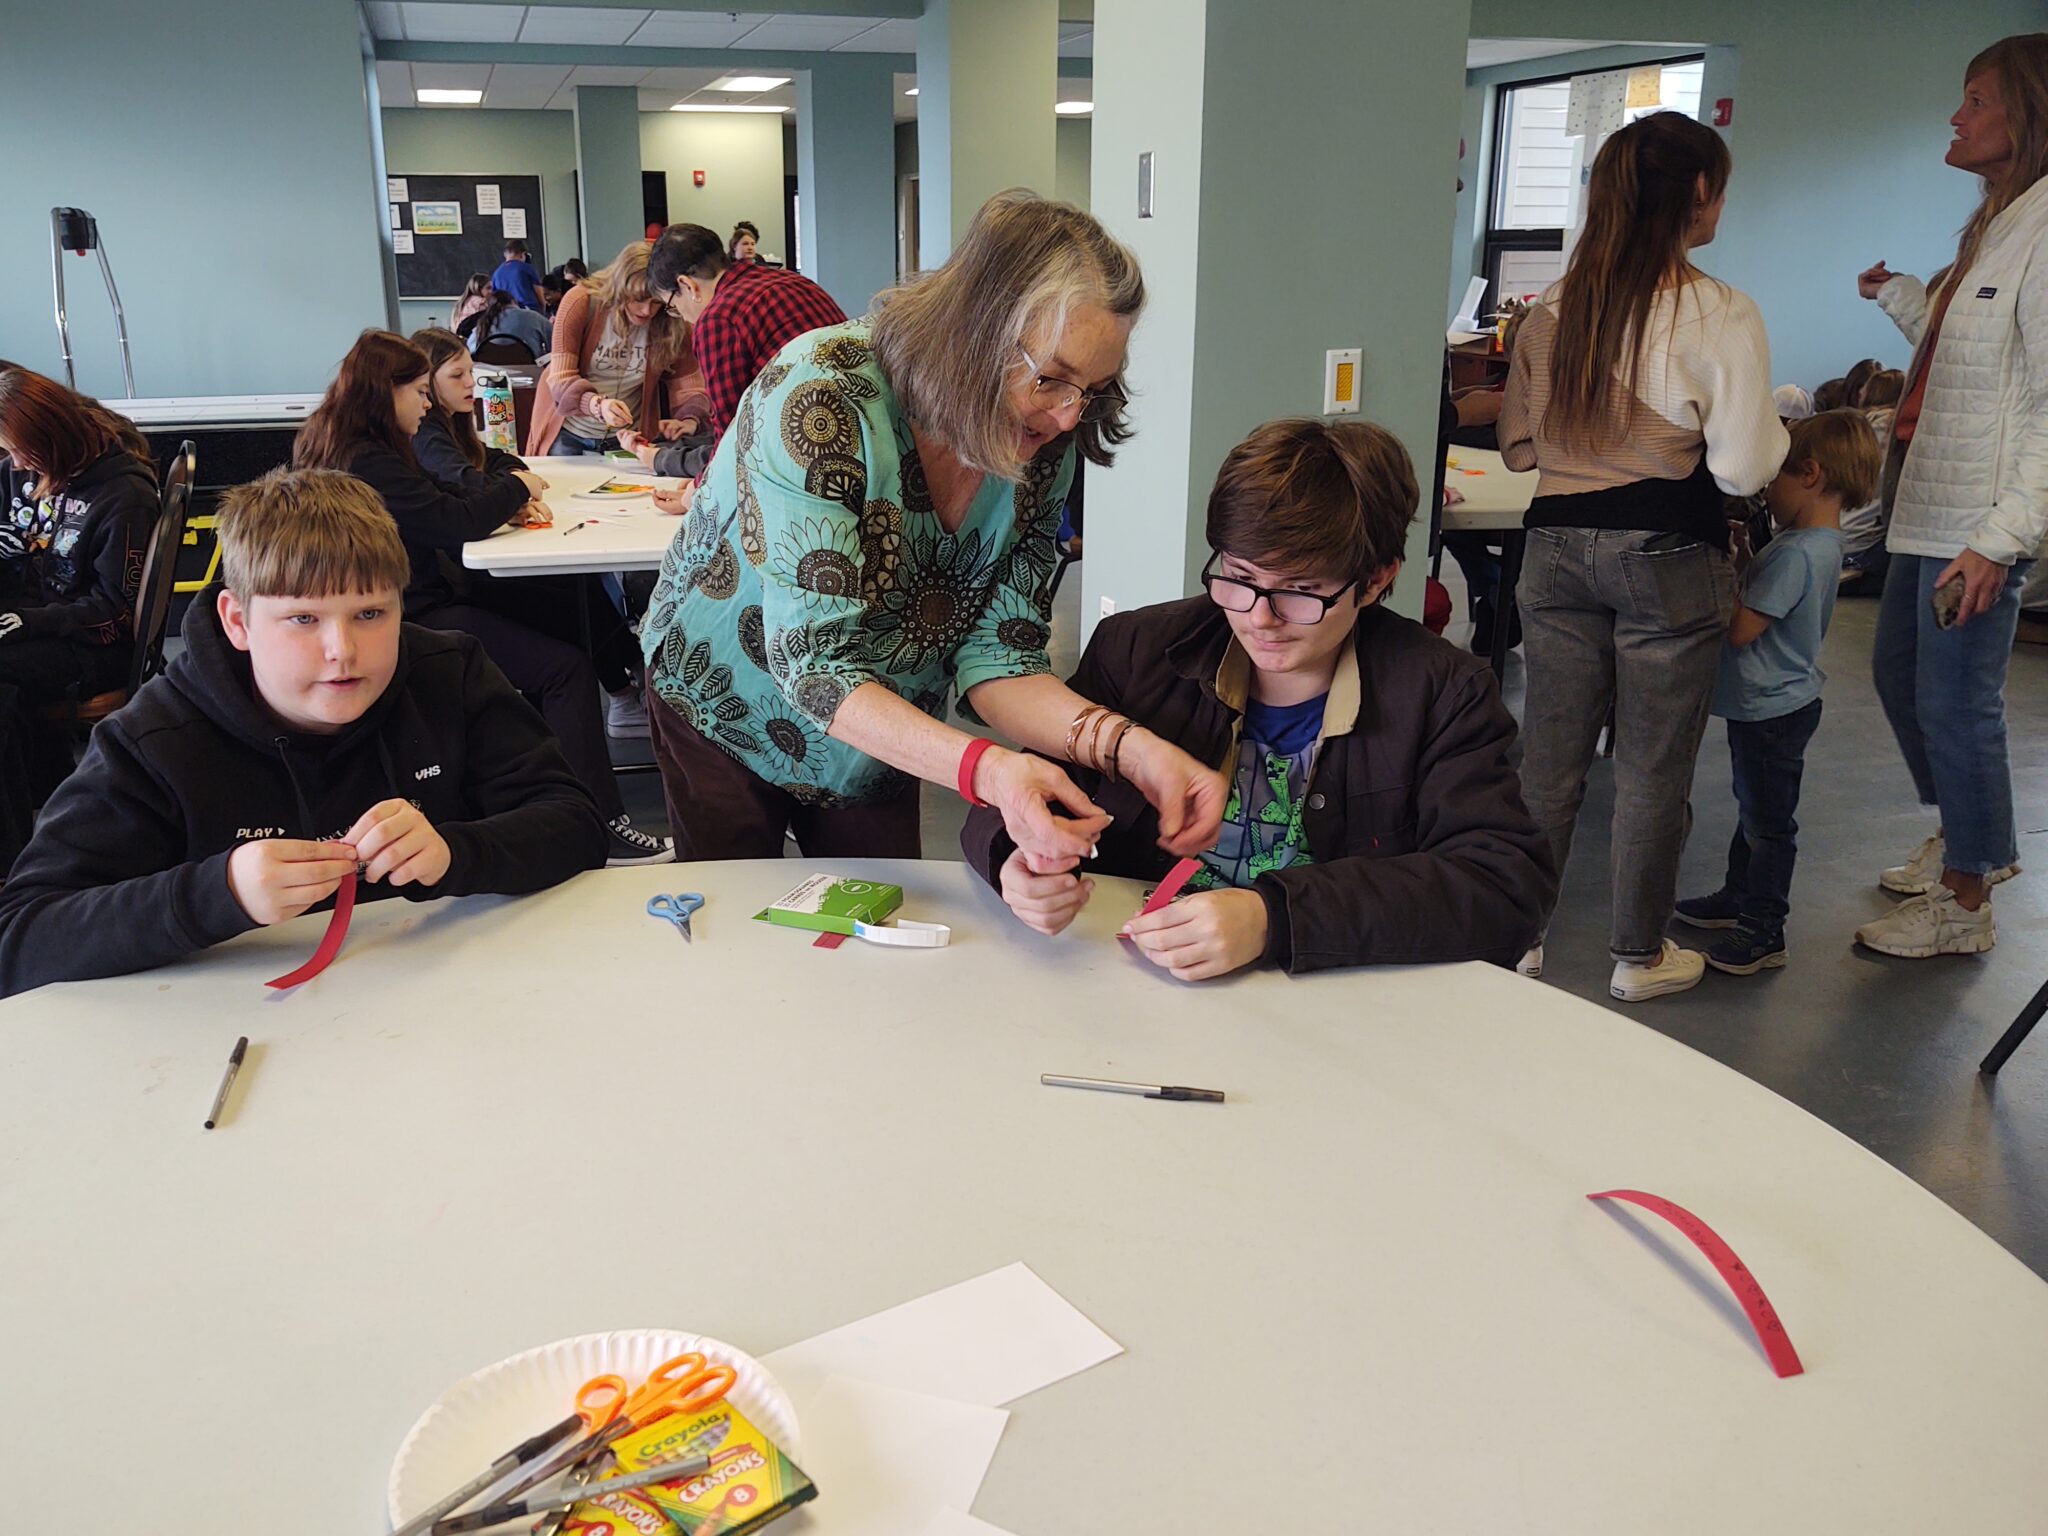 Local artist and educator, Nanette Seligman, assists a student with his bracelet to demonstrate the Purkinje effect.